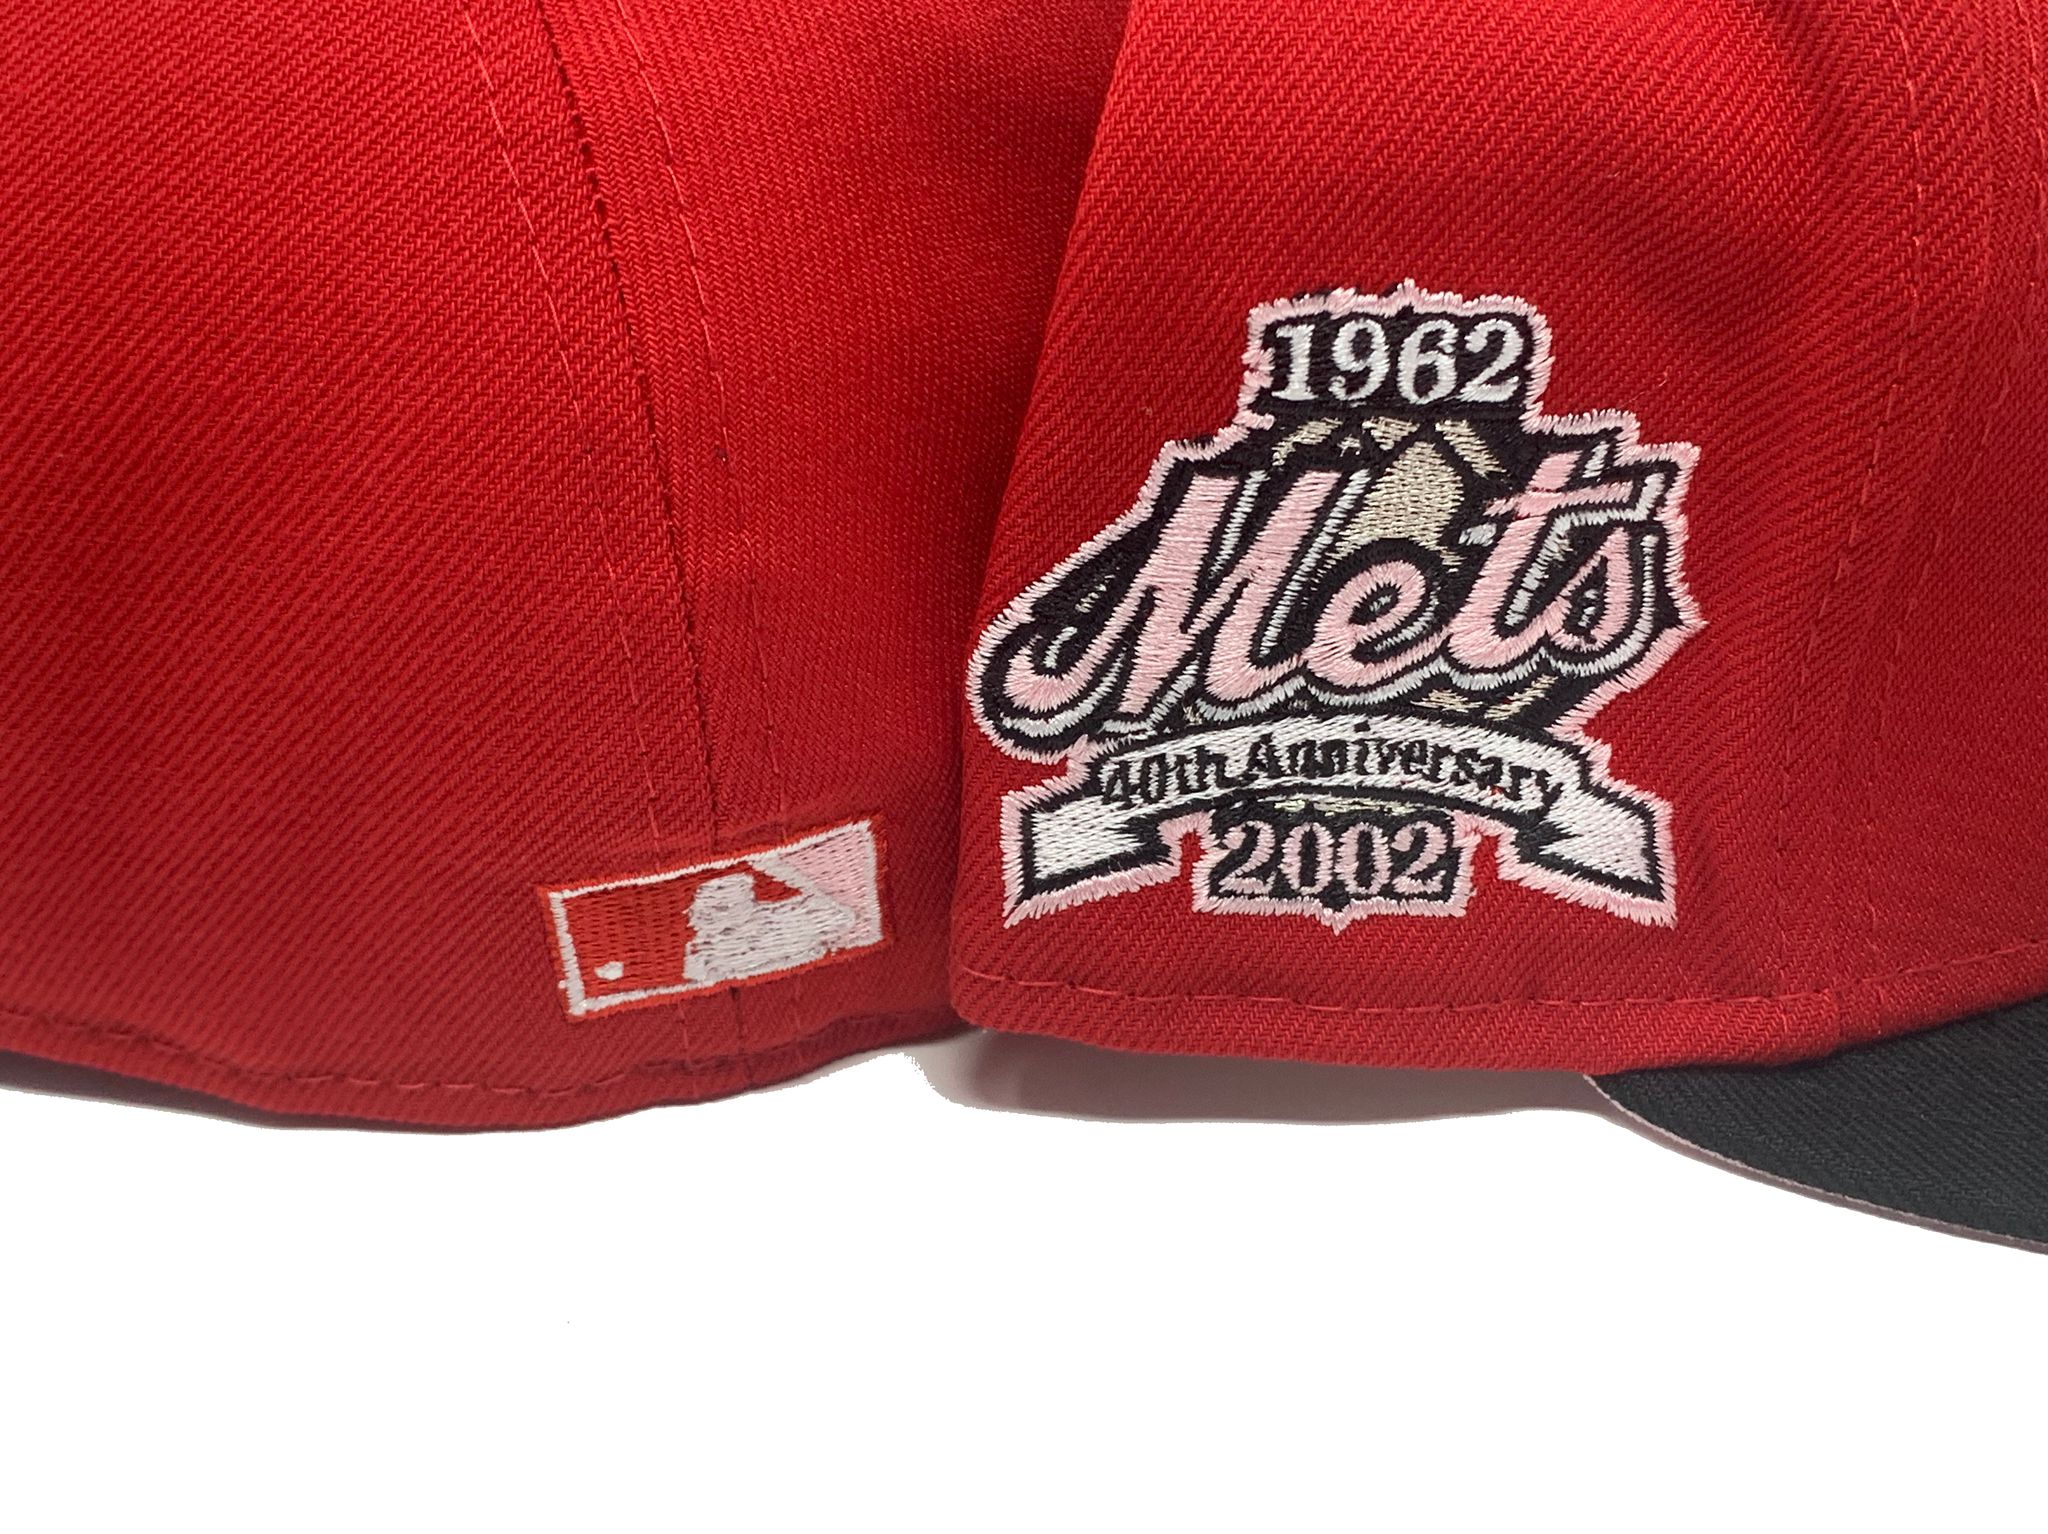 🗽 New York Mets (Los Mets) 60th Anniversary New Era Fitted Cap in